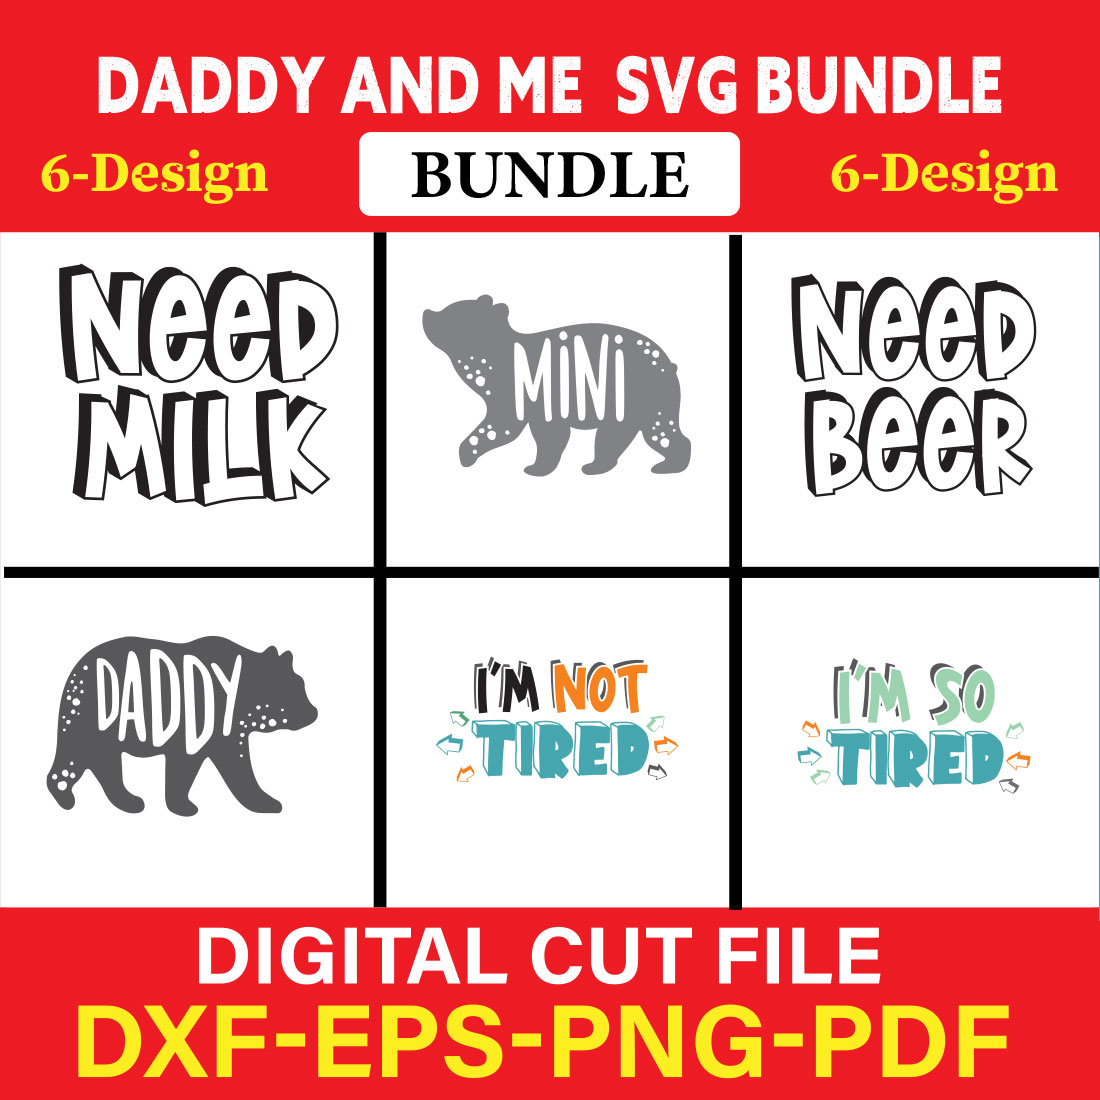 Daddy And Me T-shirt Design Bundle Vol-3 cover image.